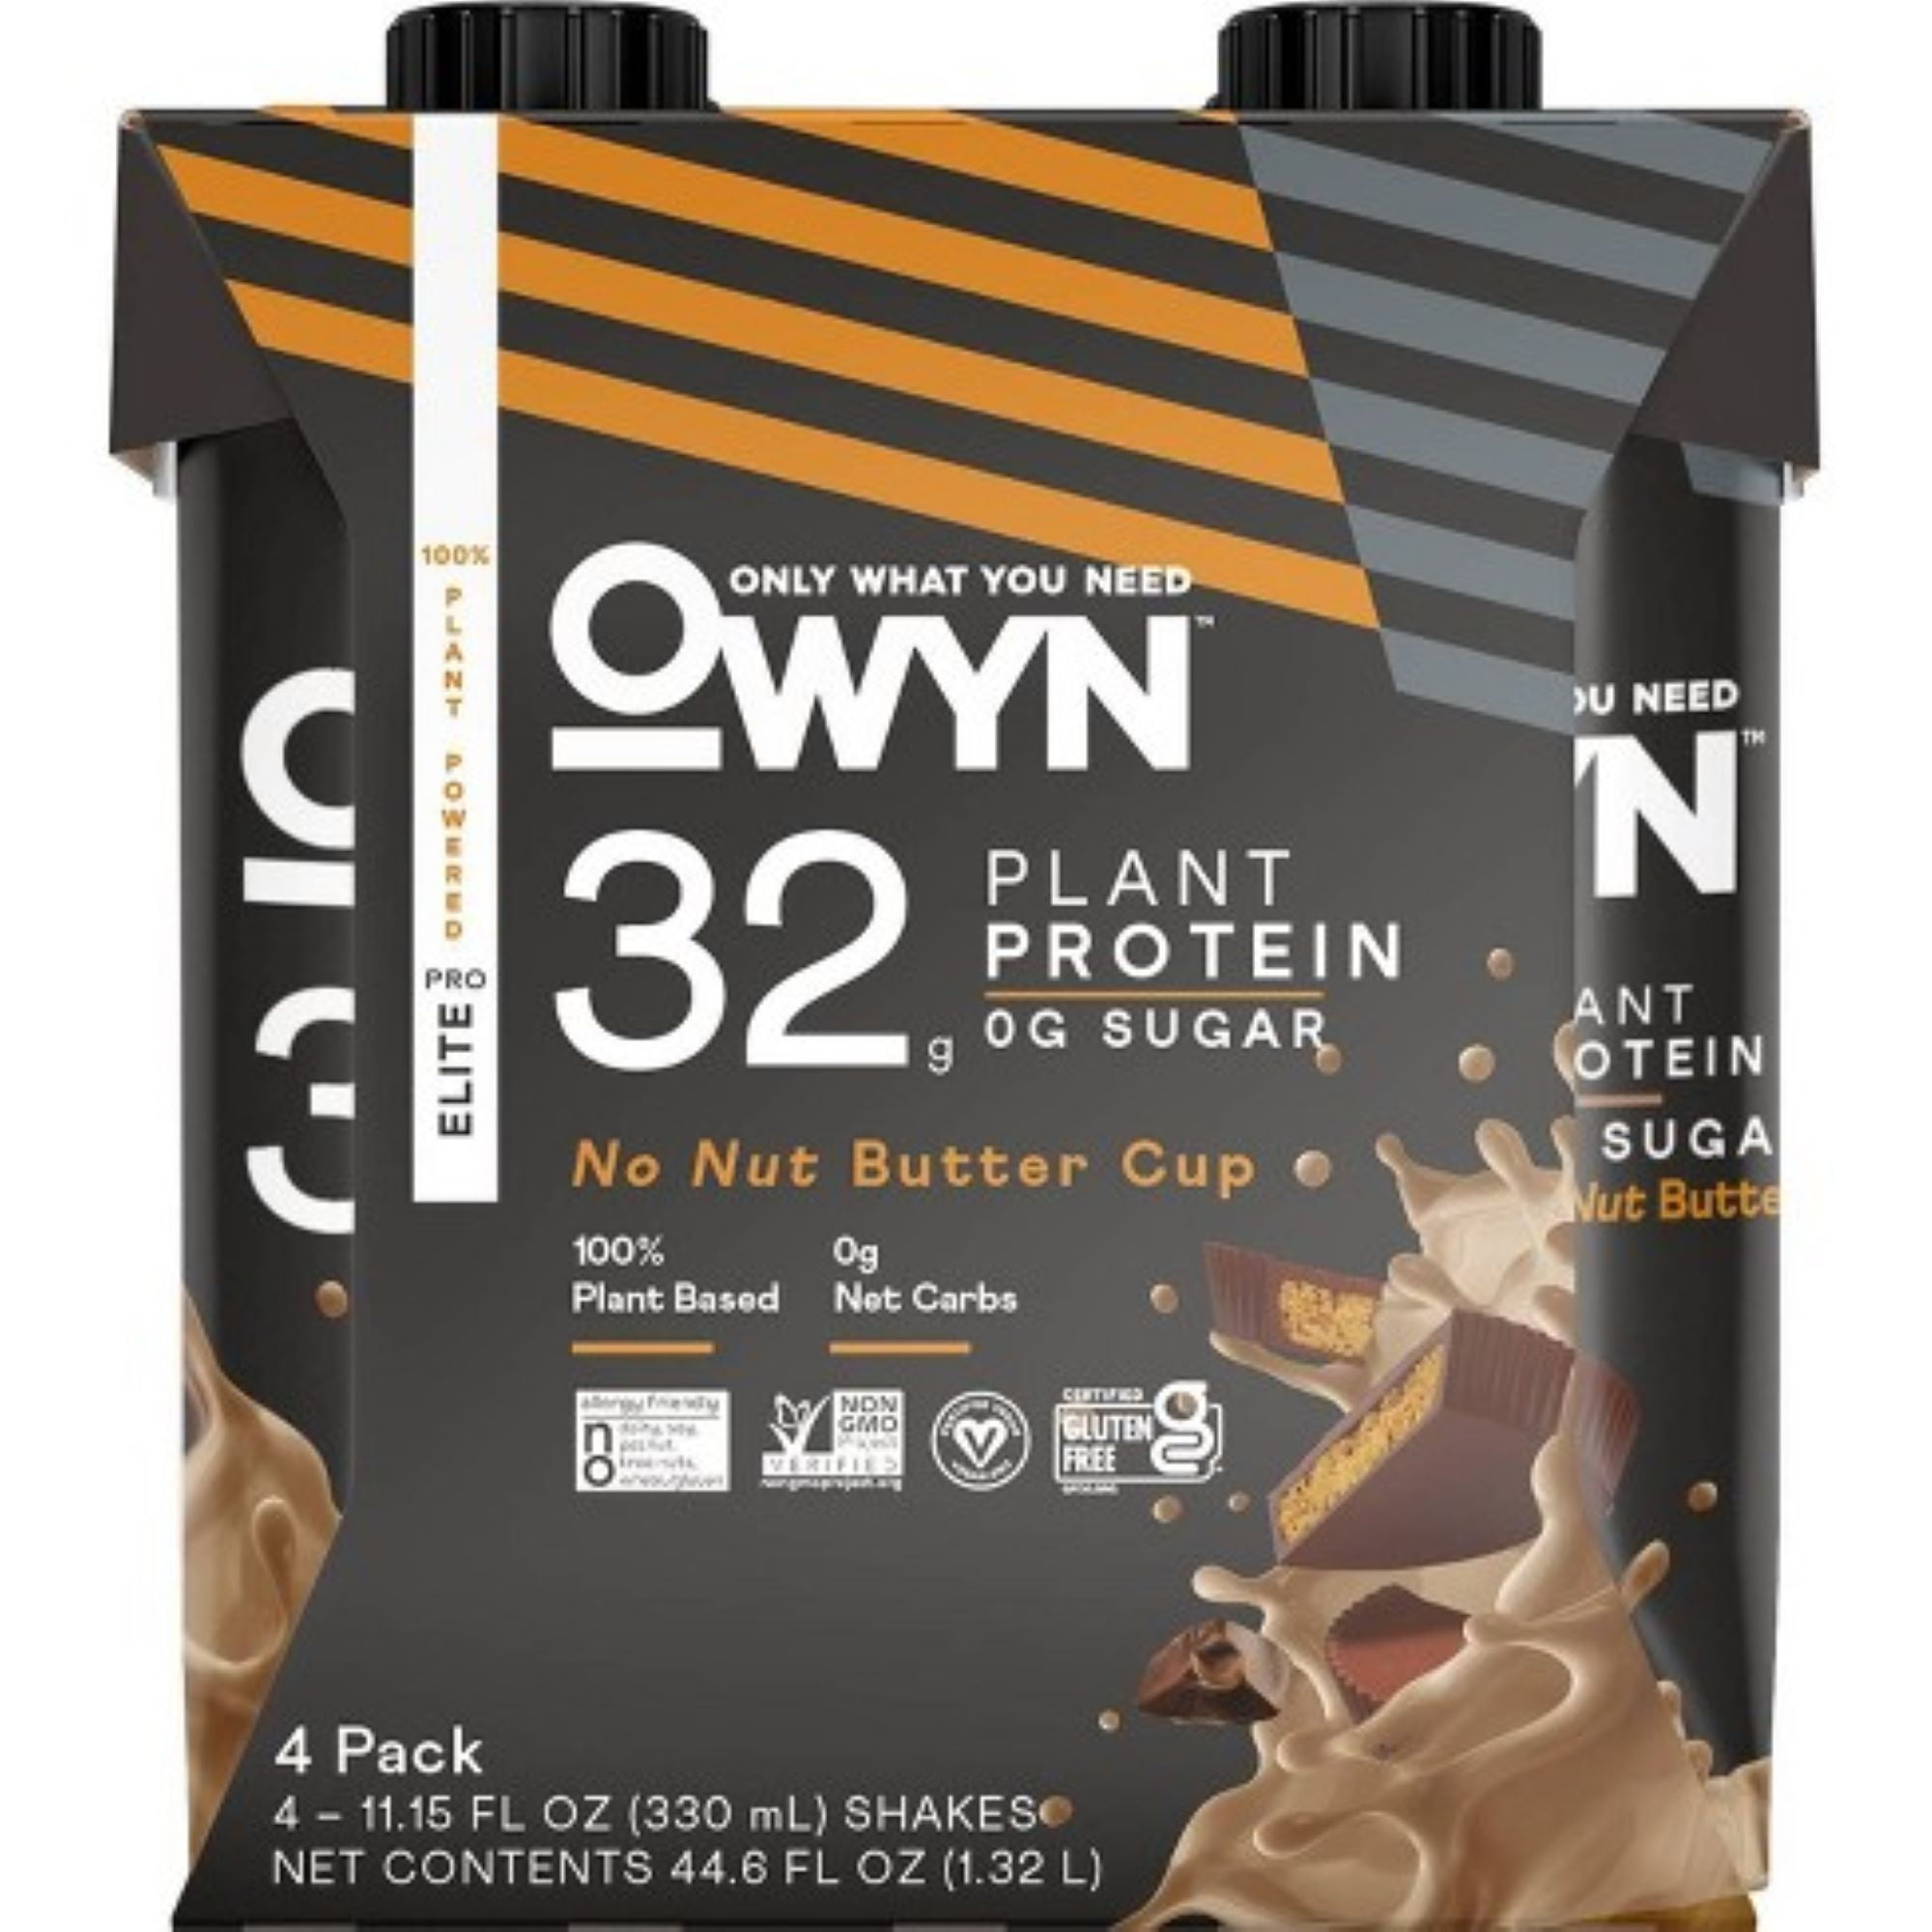 OWYN Pro Elite No Nut Buttercup Plant Protein Shake, 4 Ct, 32g